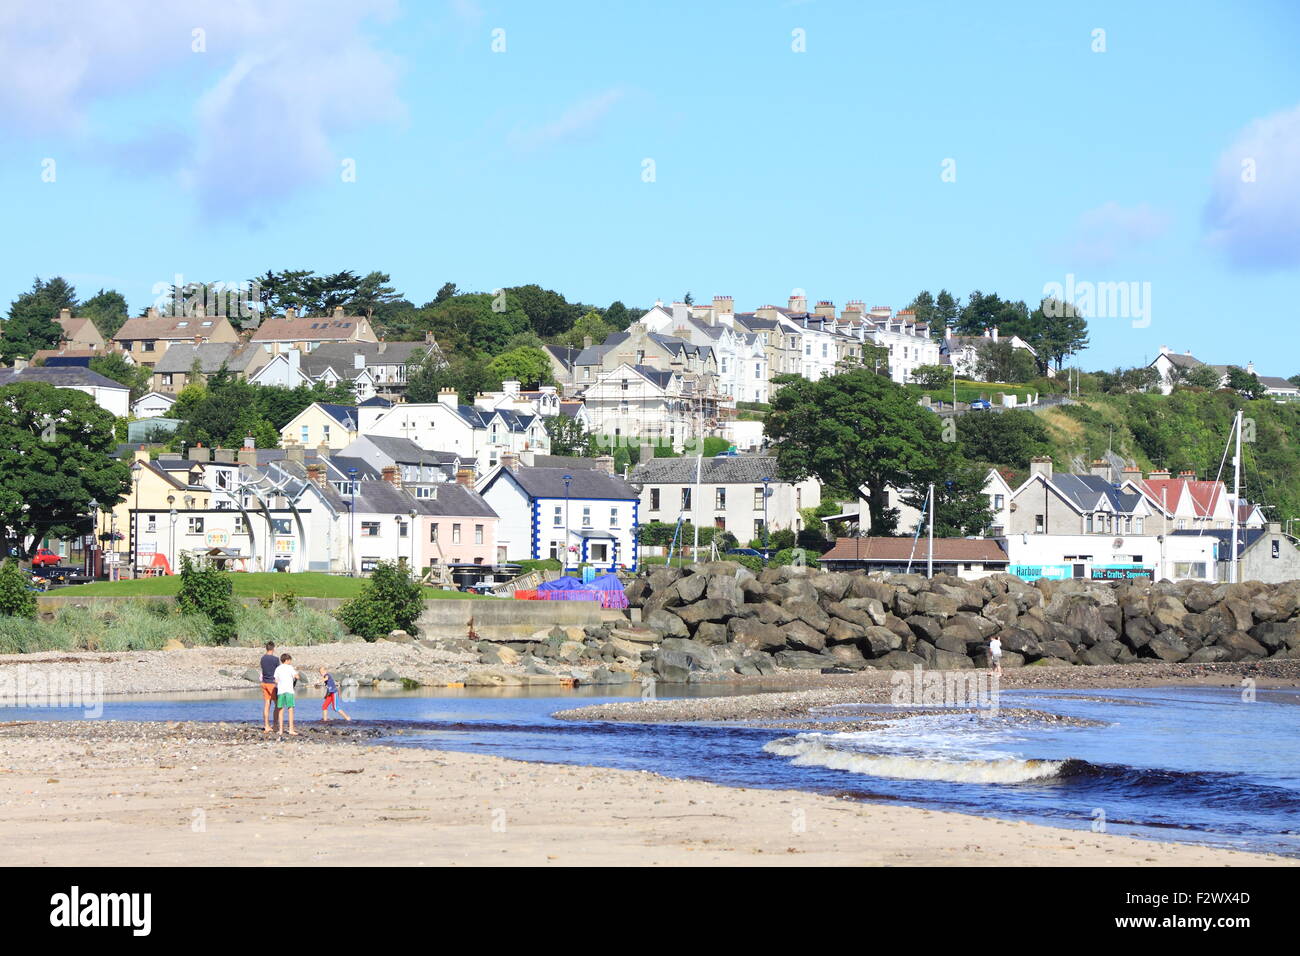 Looking across the strand to the town of Ballycastle, Northern Ireland. Stock Photo